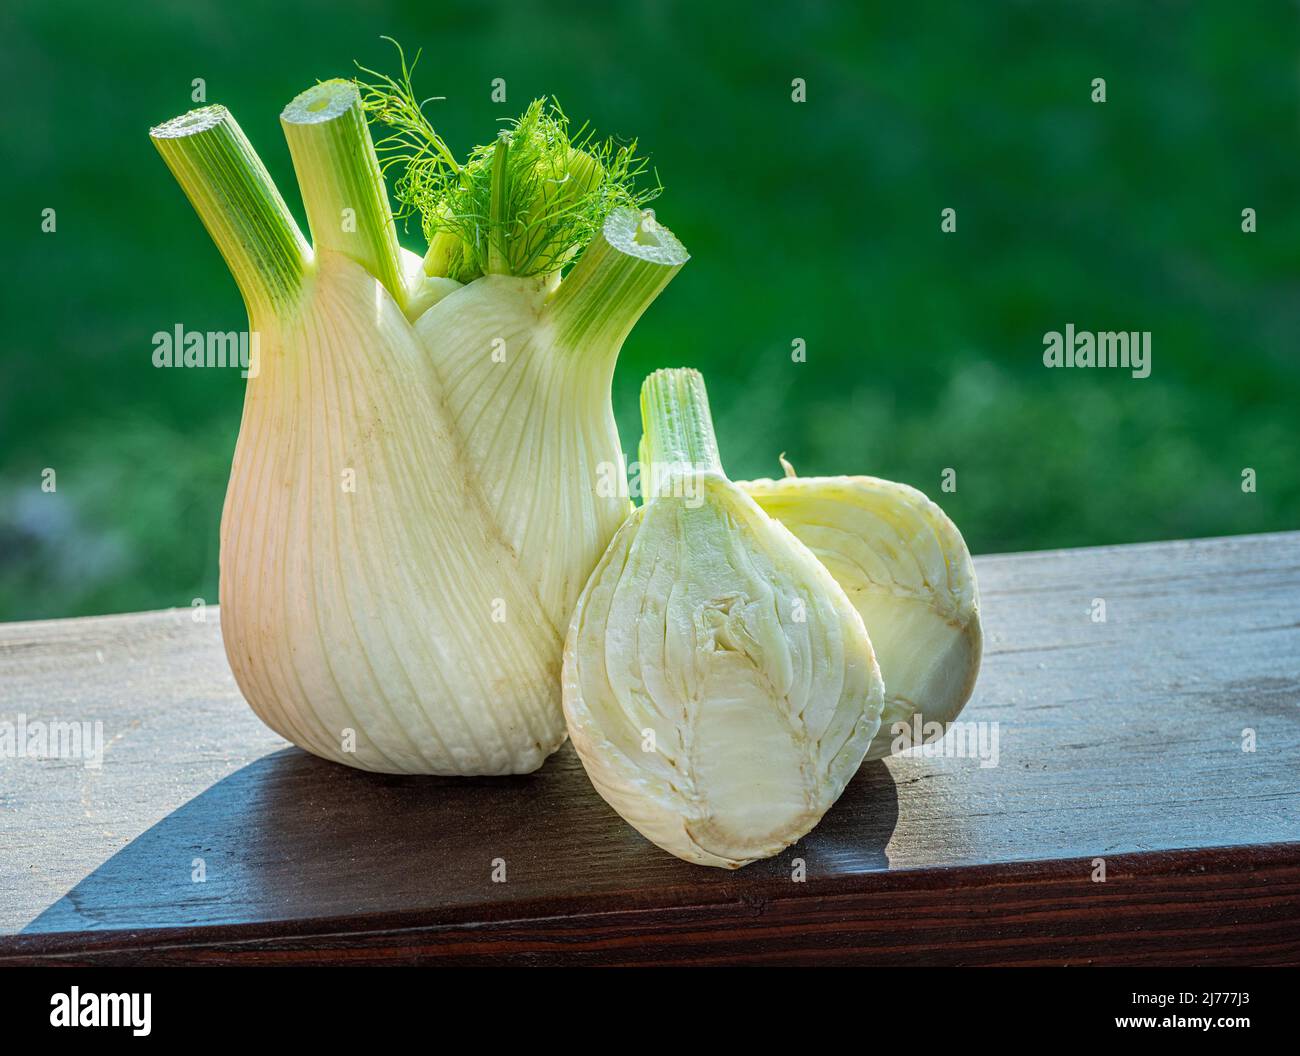 Florence fennel bulbs on aged wooden board. Green nature background. Stock Photo